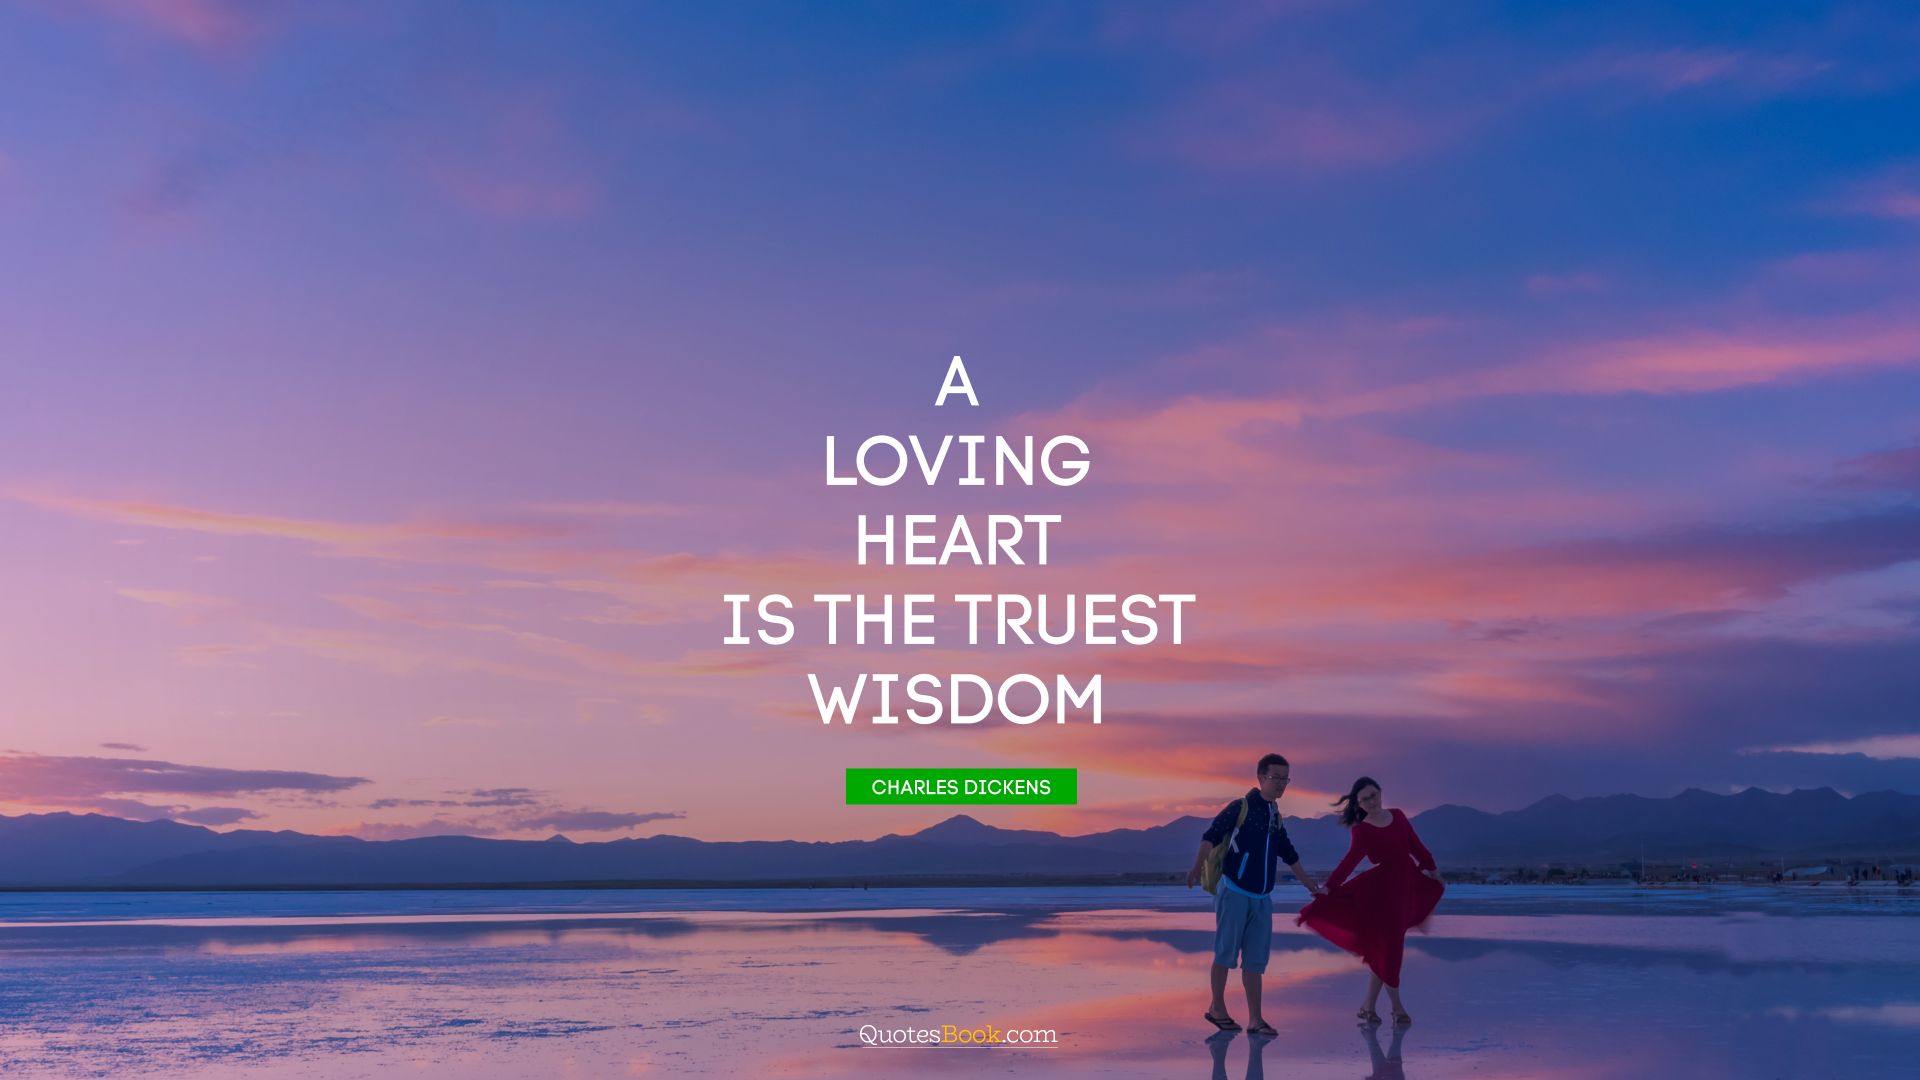 A loving heart is the truest wisdom. - Quote by Charles Dickens